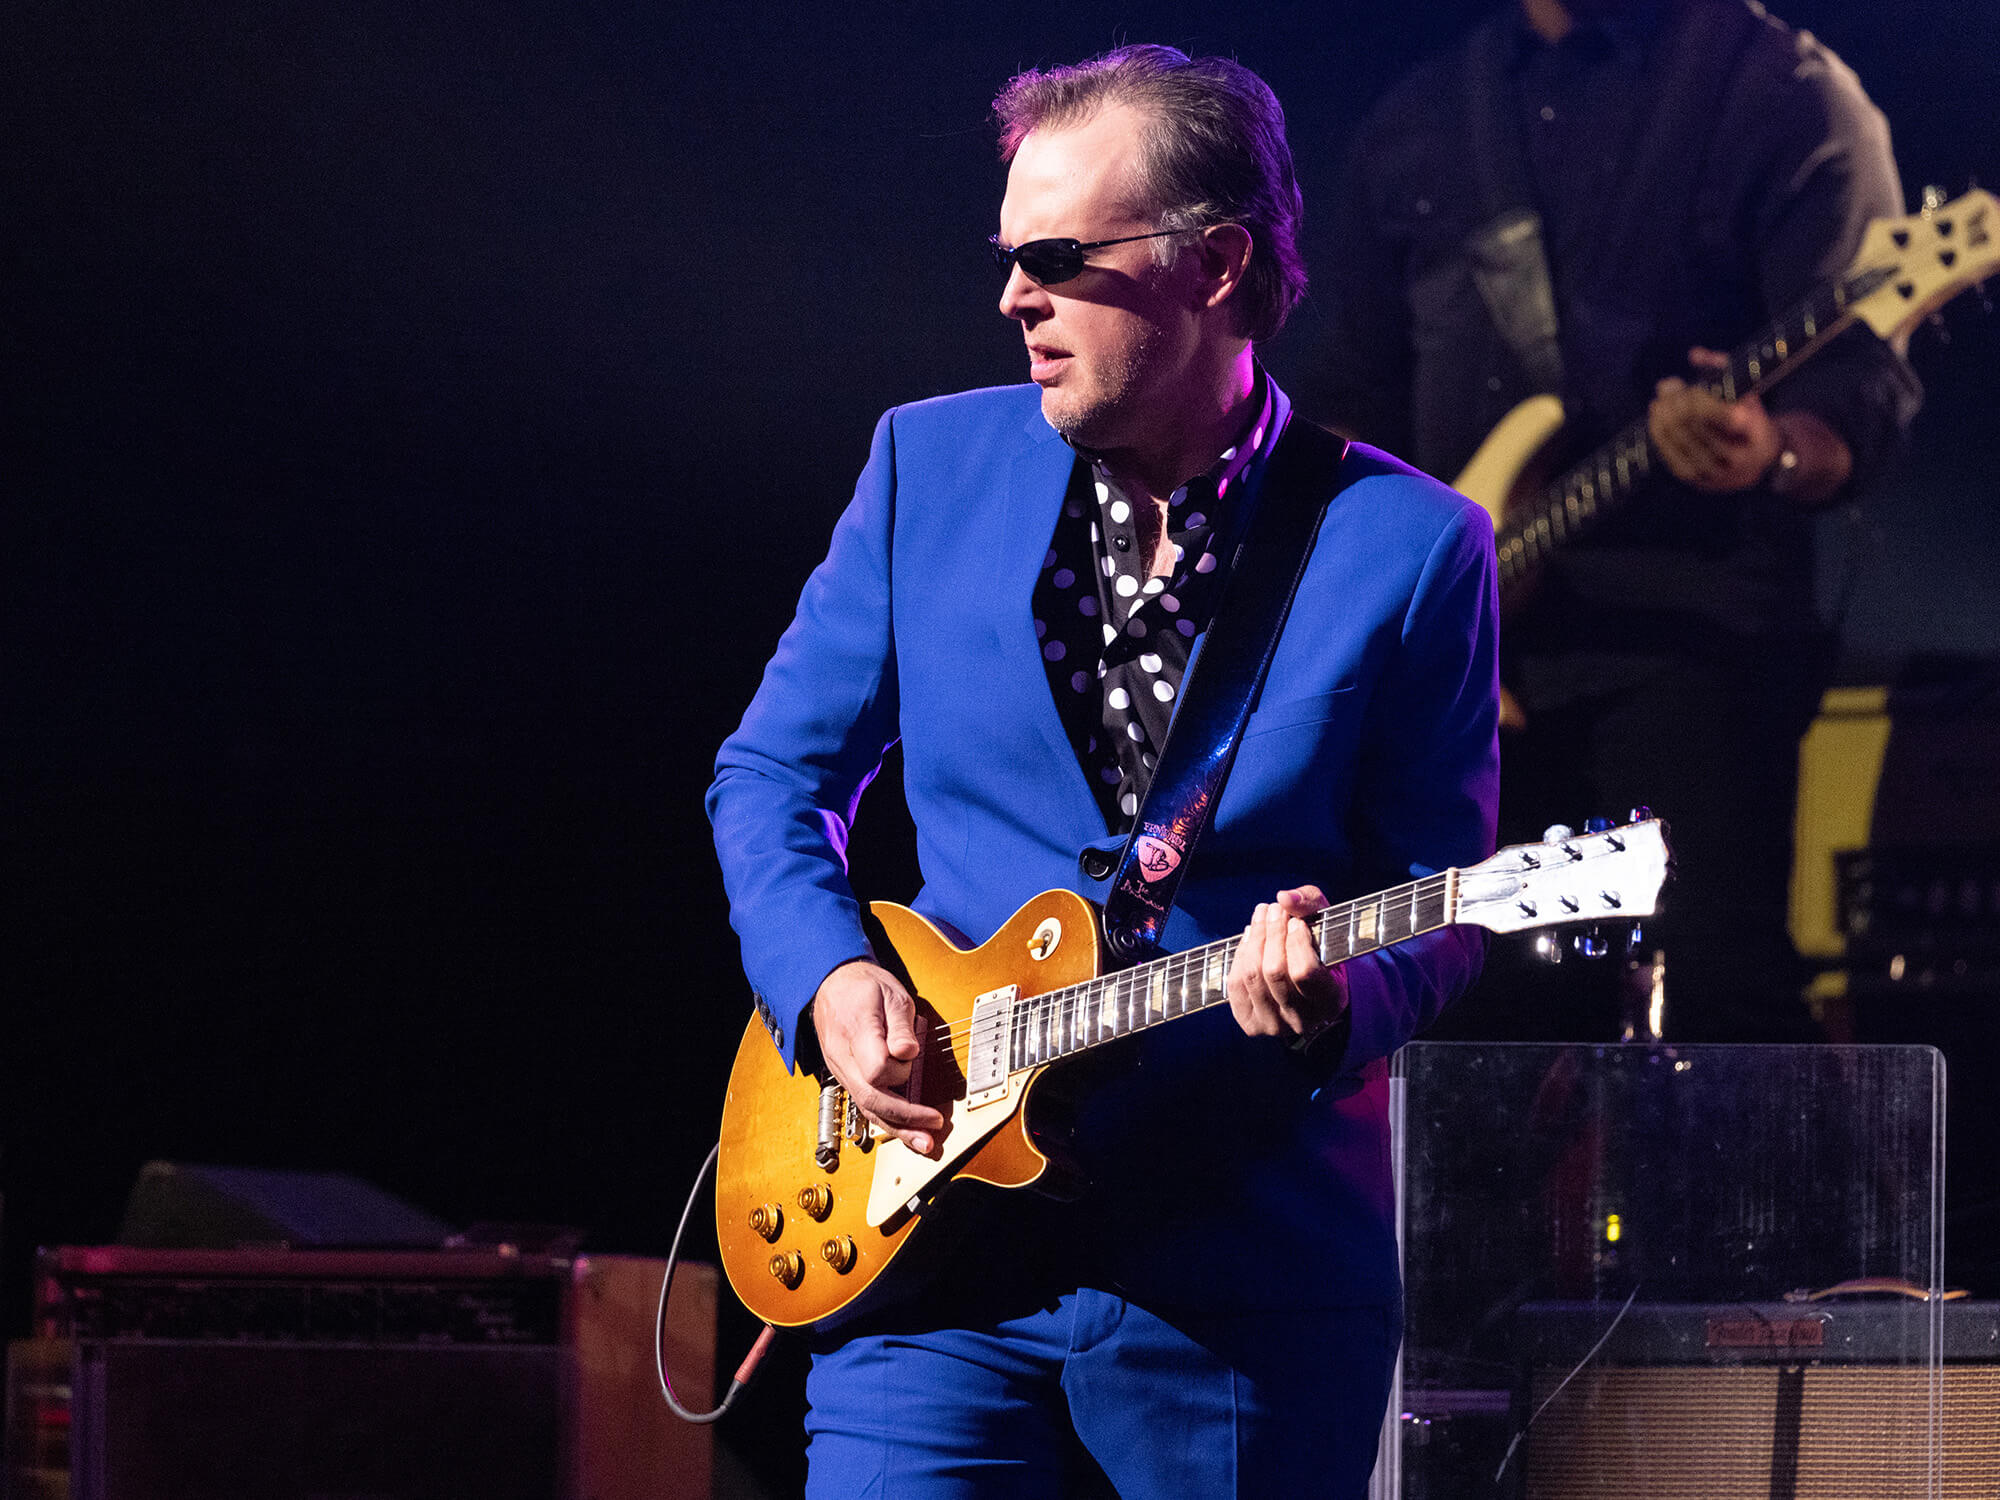 Joe Bonamassa on stage. He is wearing a bright blue suit and sunglasses, and is playing a Les Paul guitar.